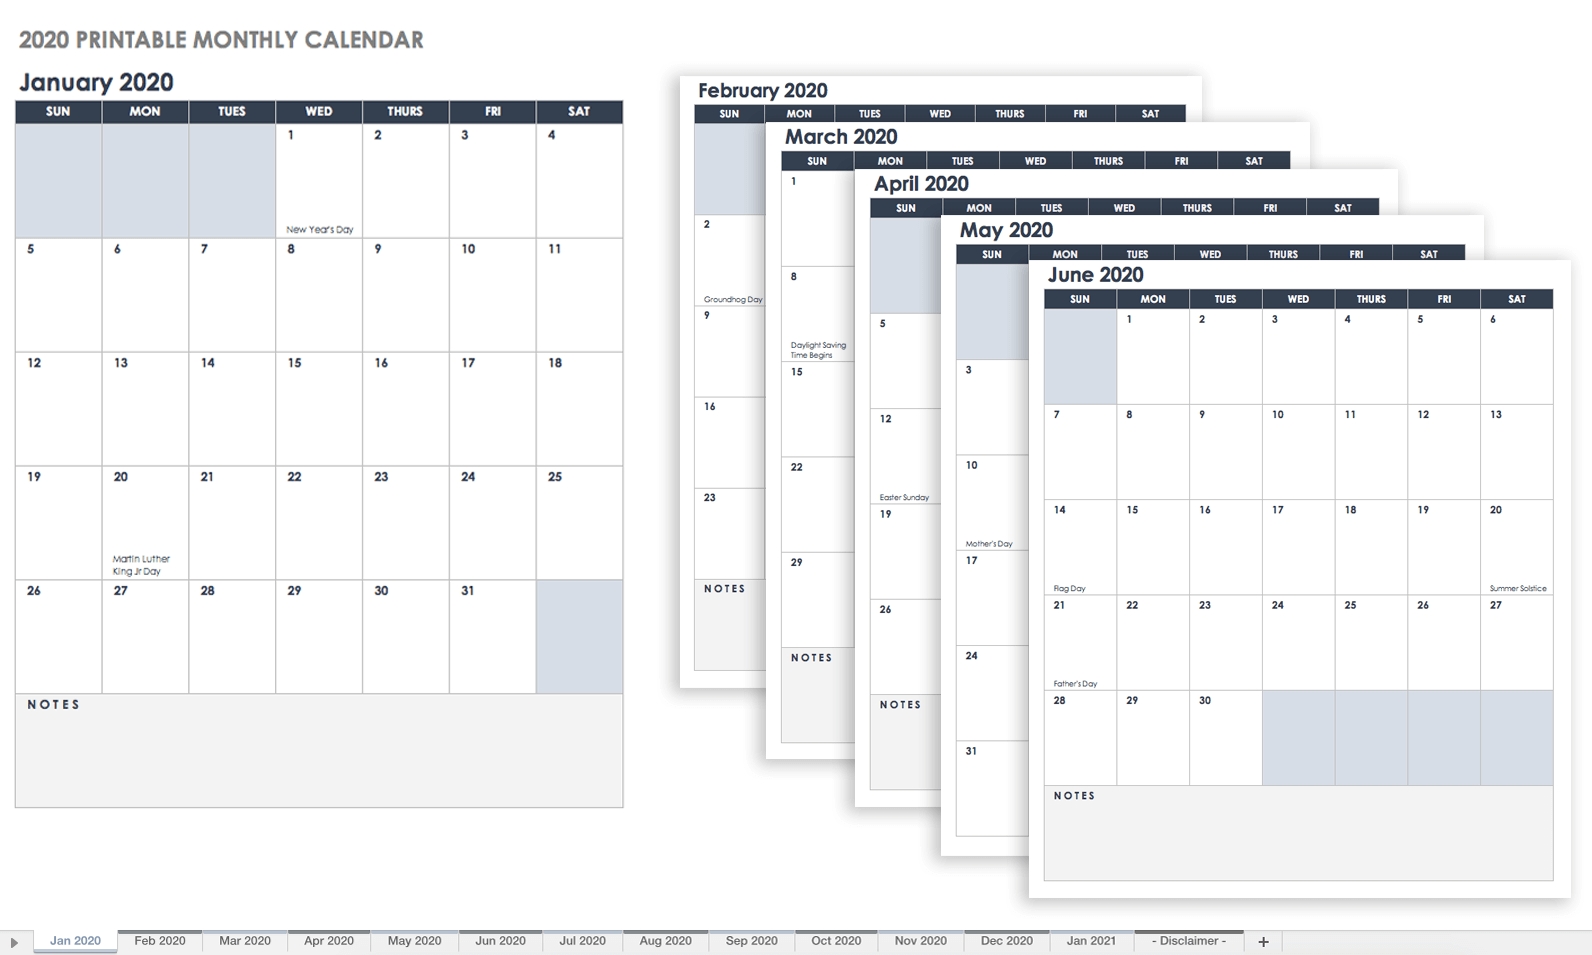 15 Free Monthly Calendar Templates | Smartsheet throughout Sample Monthly Calendars To Printable With Notes